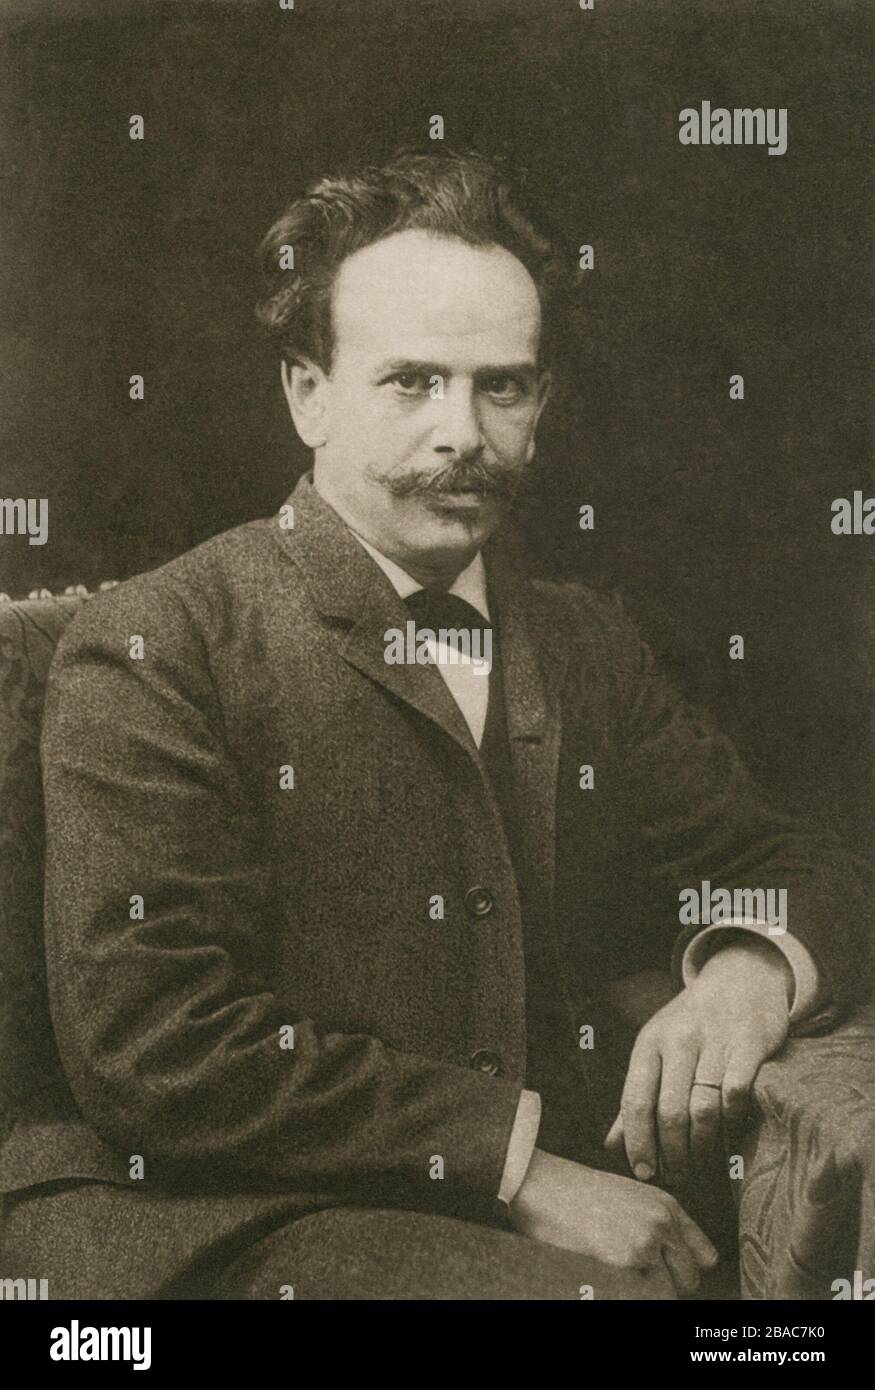 Franz Boas, German-born American anthropologist in 1906, at the age of 48. He established his leadership of the relativistic, culture-centered, school of American anthropology from Columbia University in New York City from 1899 to 1942. His great contribution was that 'race' was a cultural construct, and opposed ideas of European racial superiority  (BSLOC_2018_4_95) Stock Photo